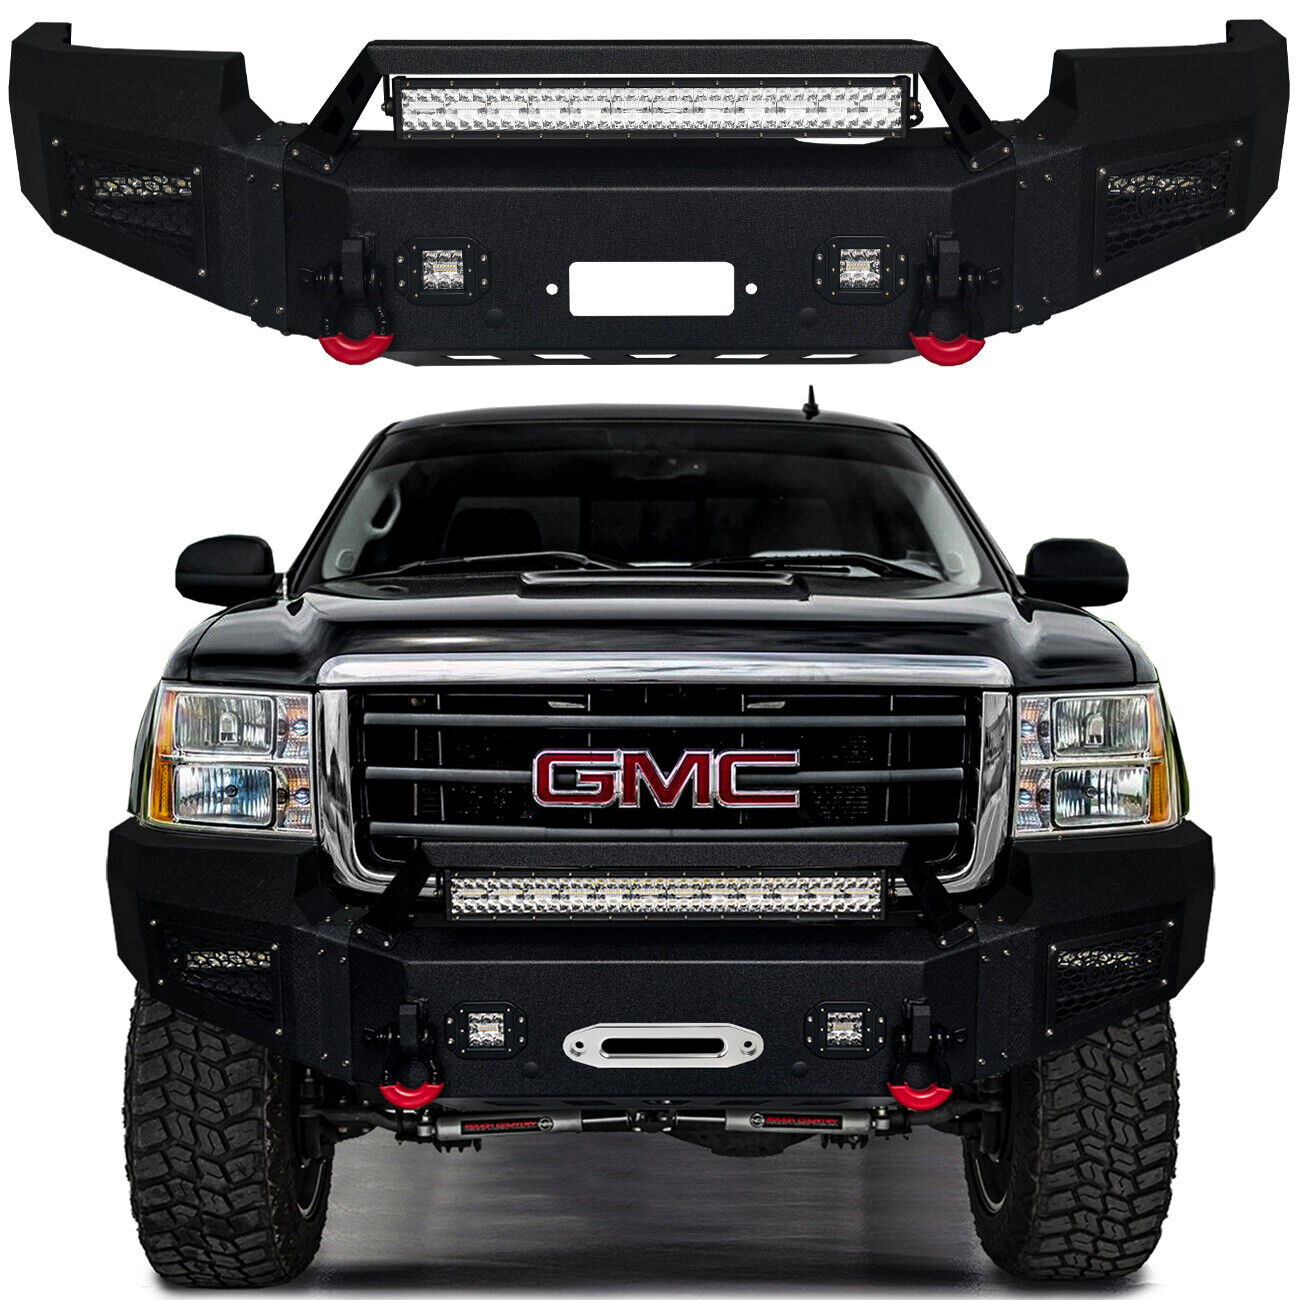 Vijay Fits 2007-2013 GMC Sierra 1500 Front or Rear Bumper with LED Lights